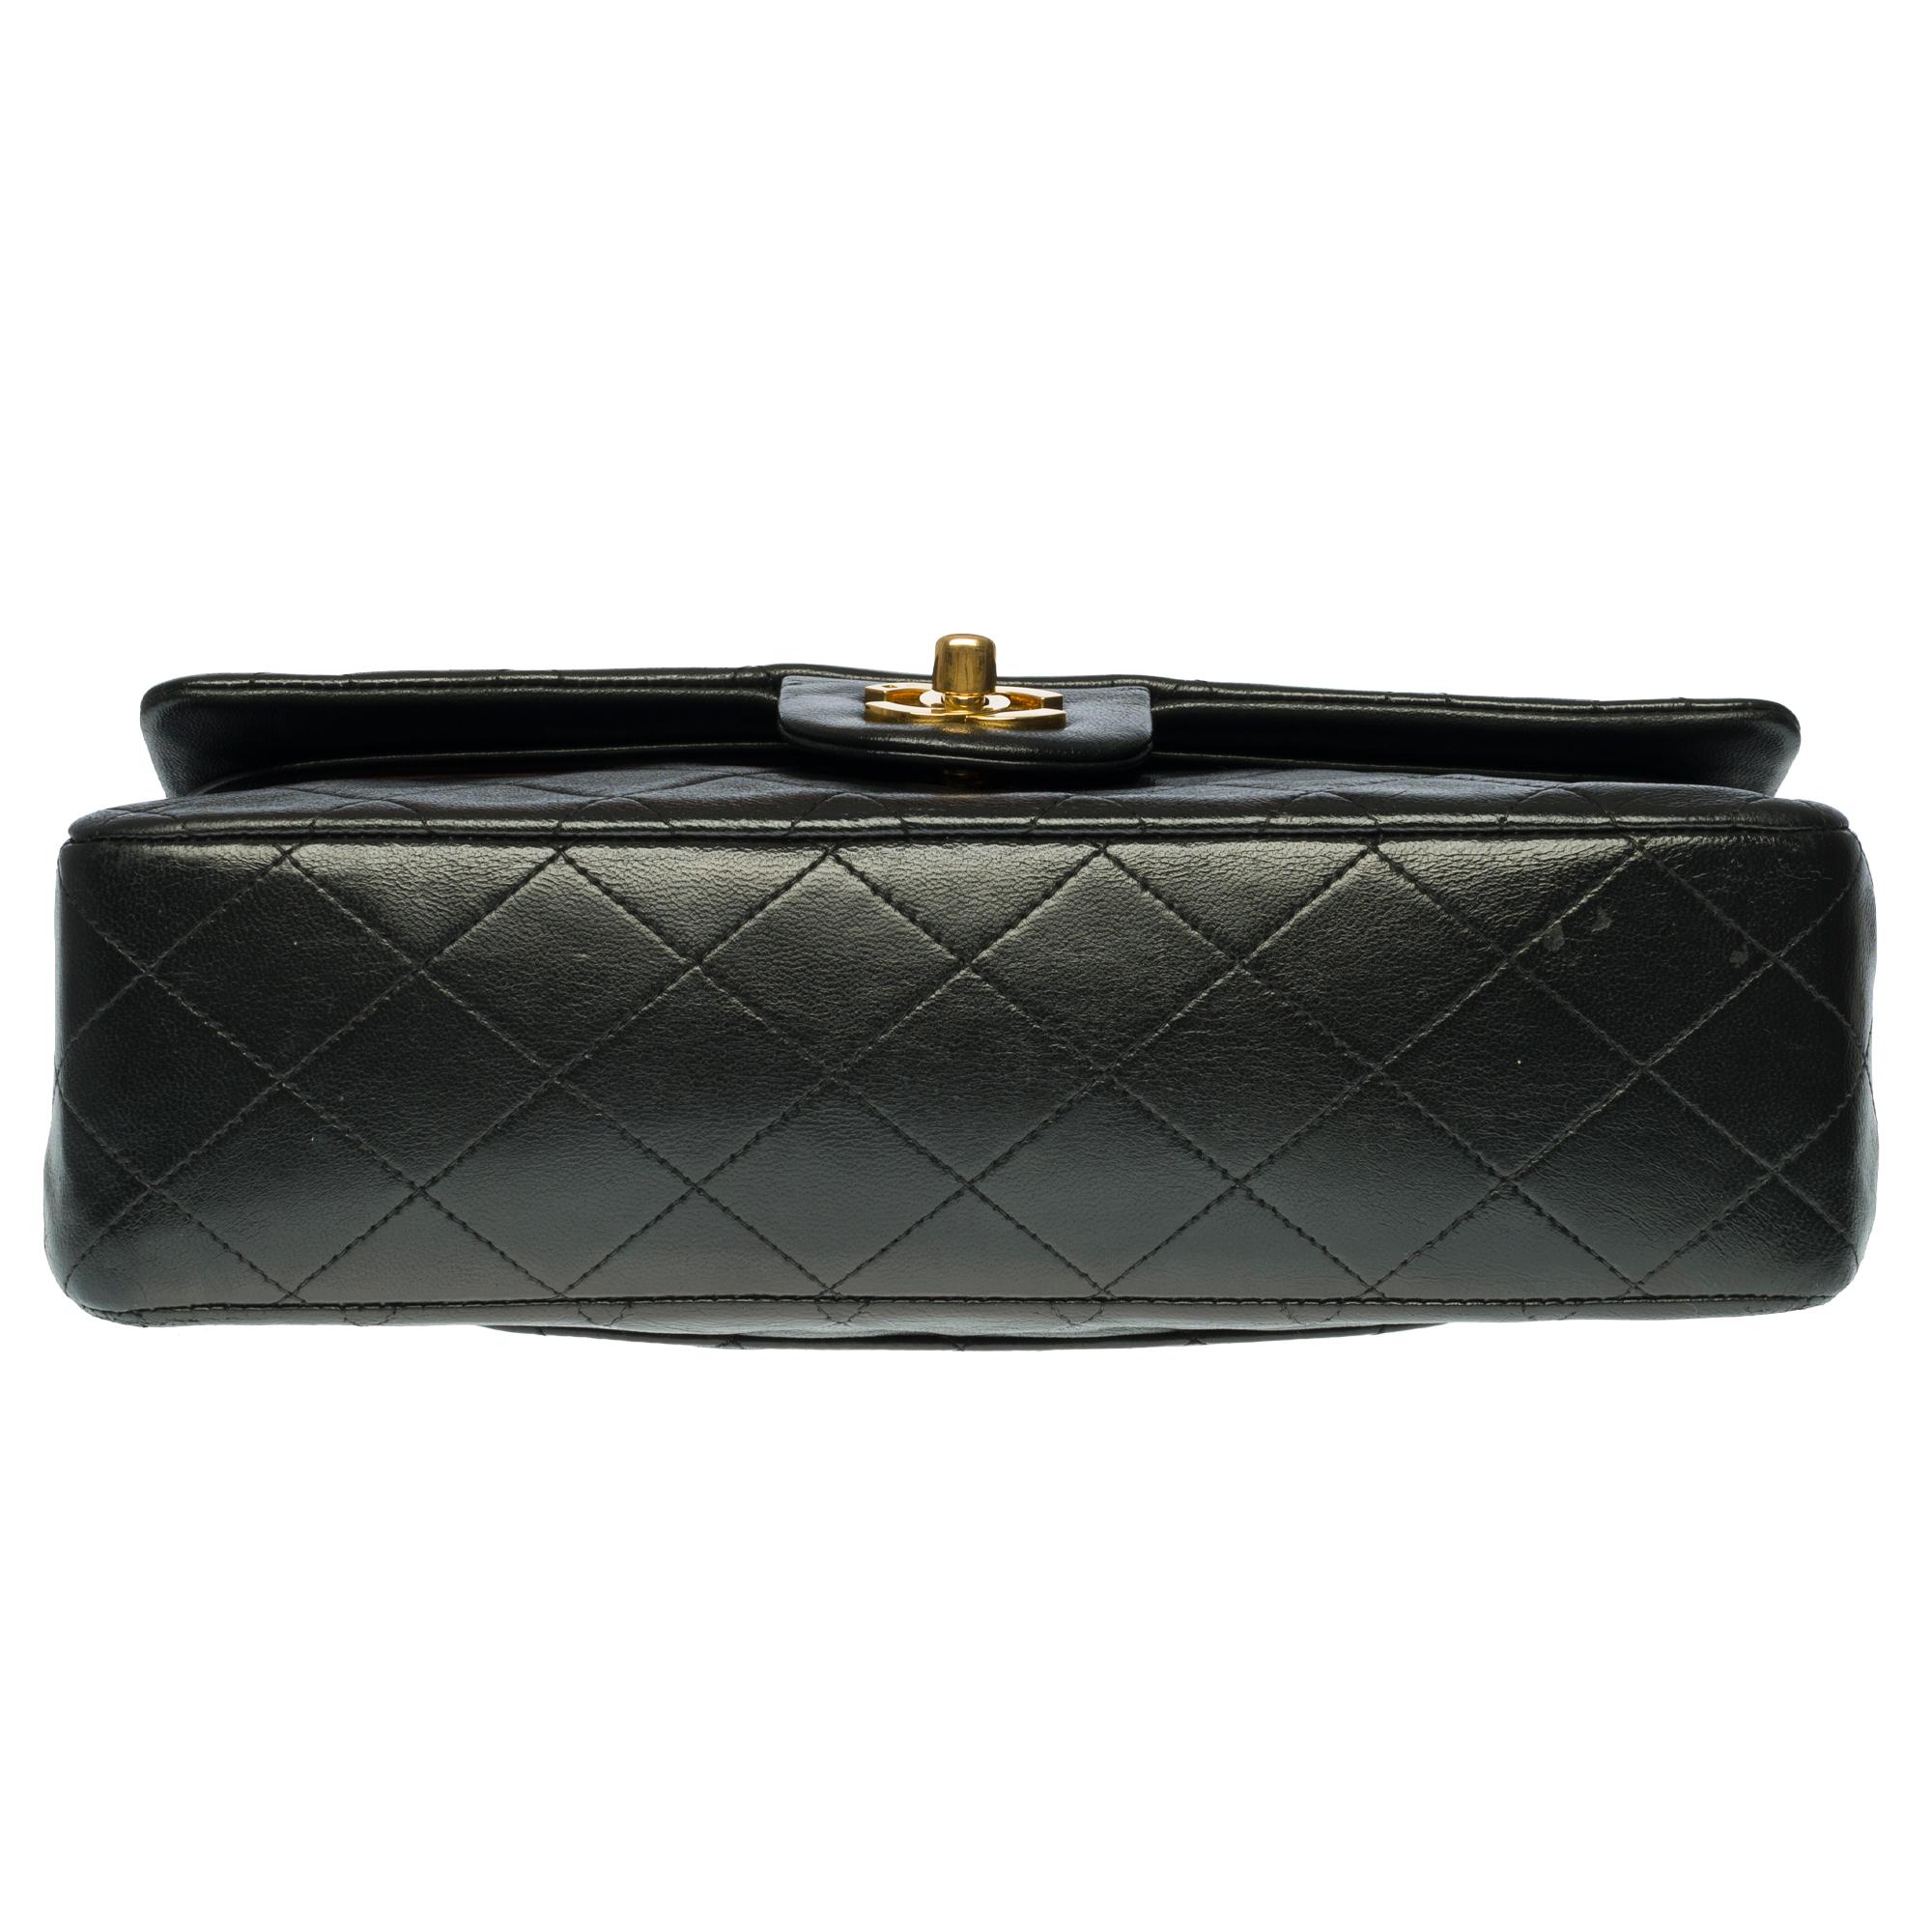 Chanel Timeless Medium Shoulder bag in black quilted lambskin and gold hardware 1